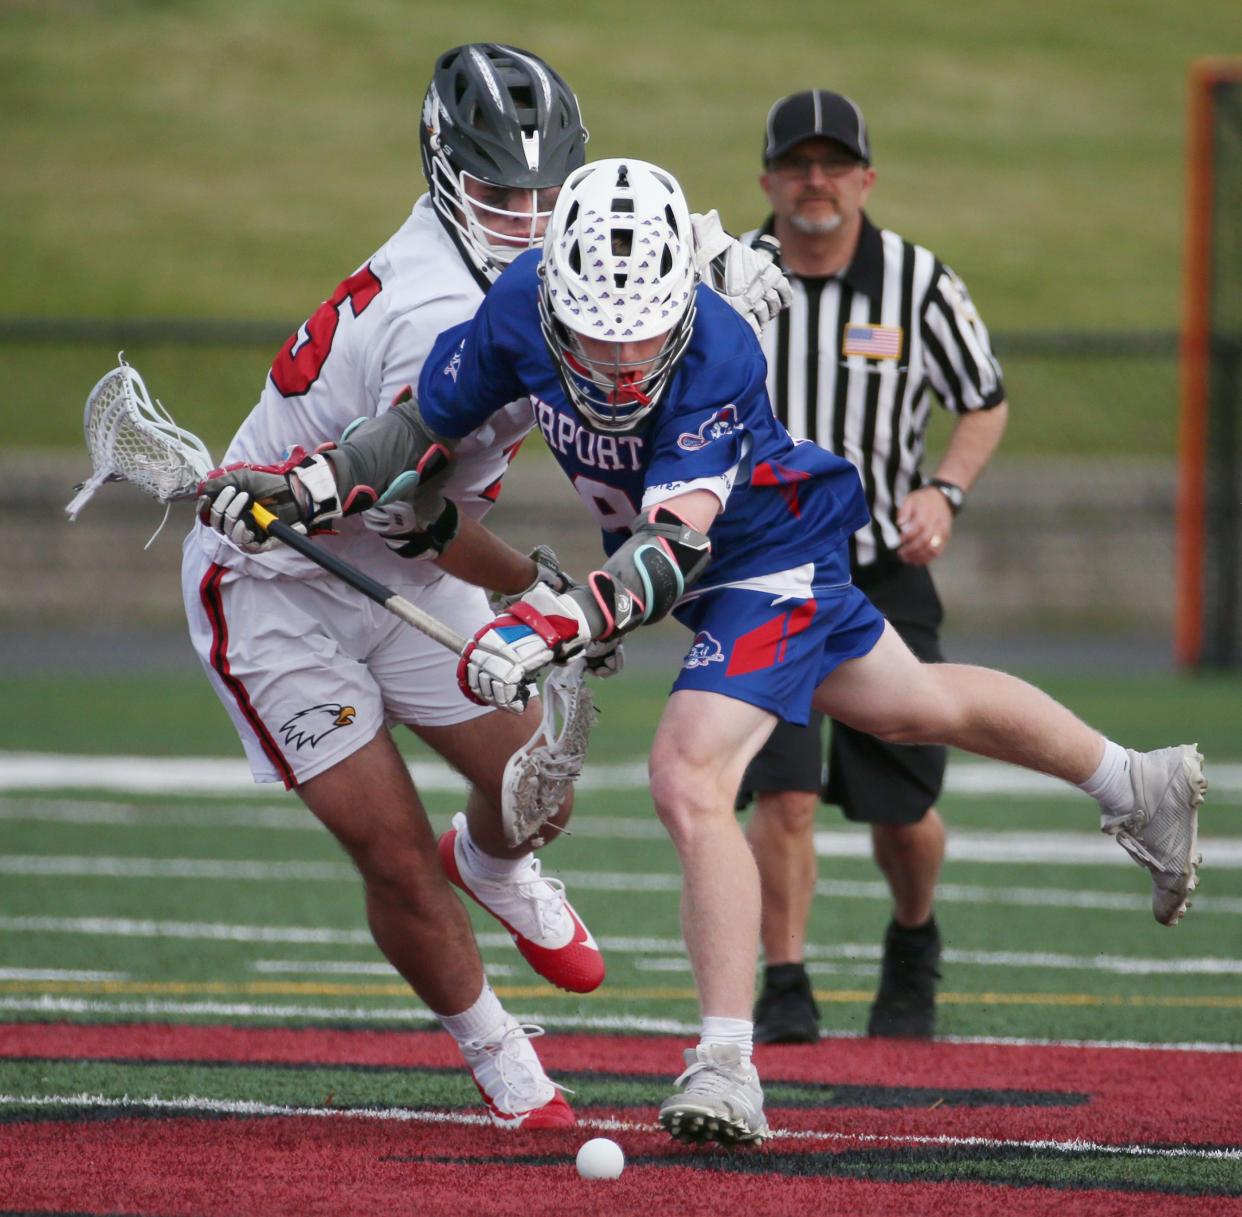 Fairport's Mitchell Monte gets a step on Penfield's Ethan Hamilton as they battle for the ball at midfield.